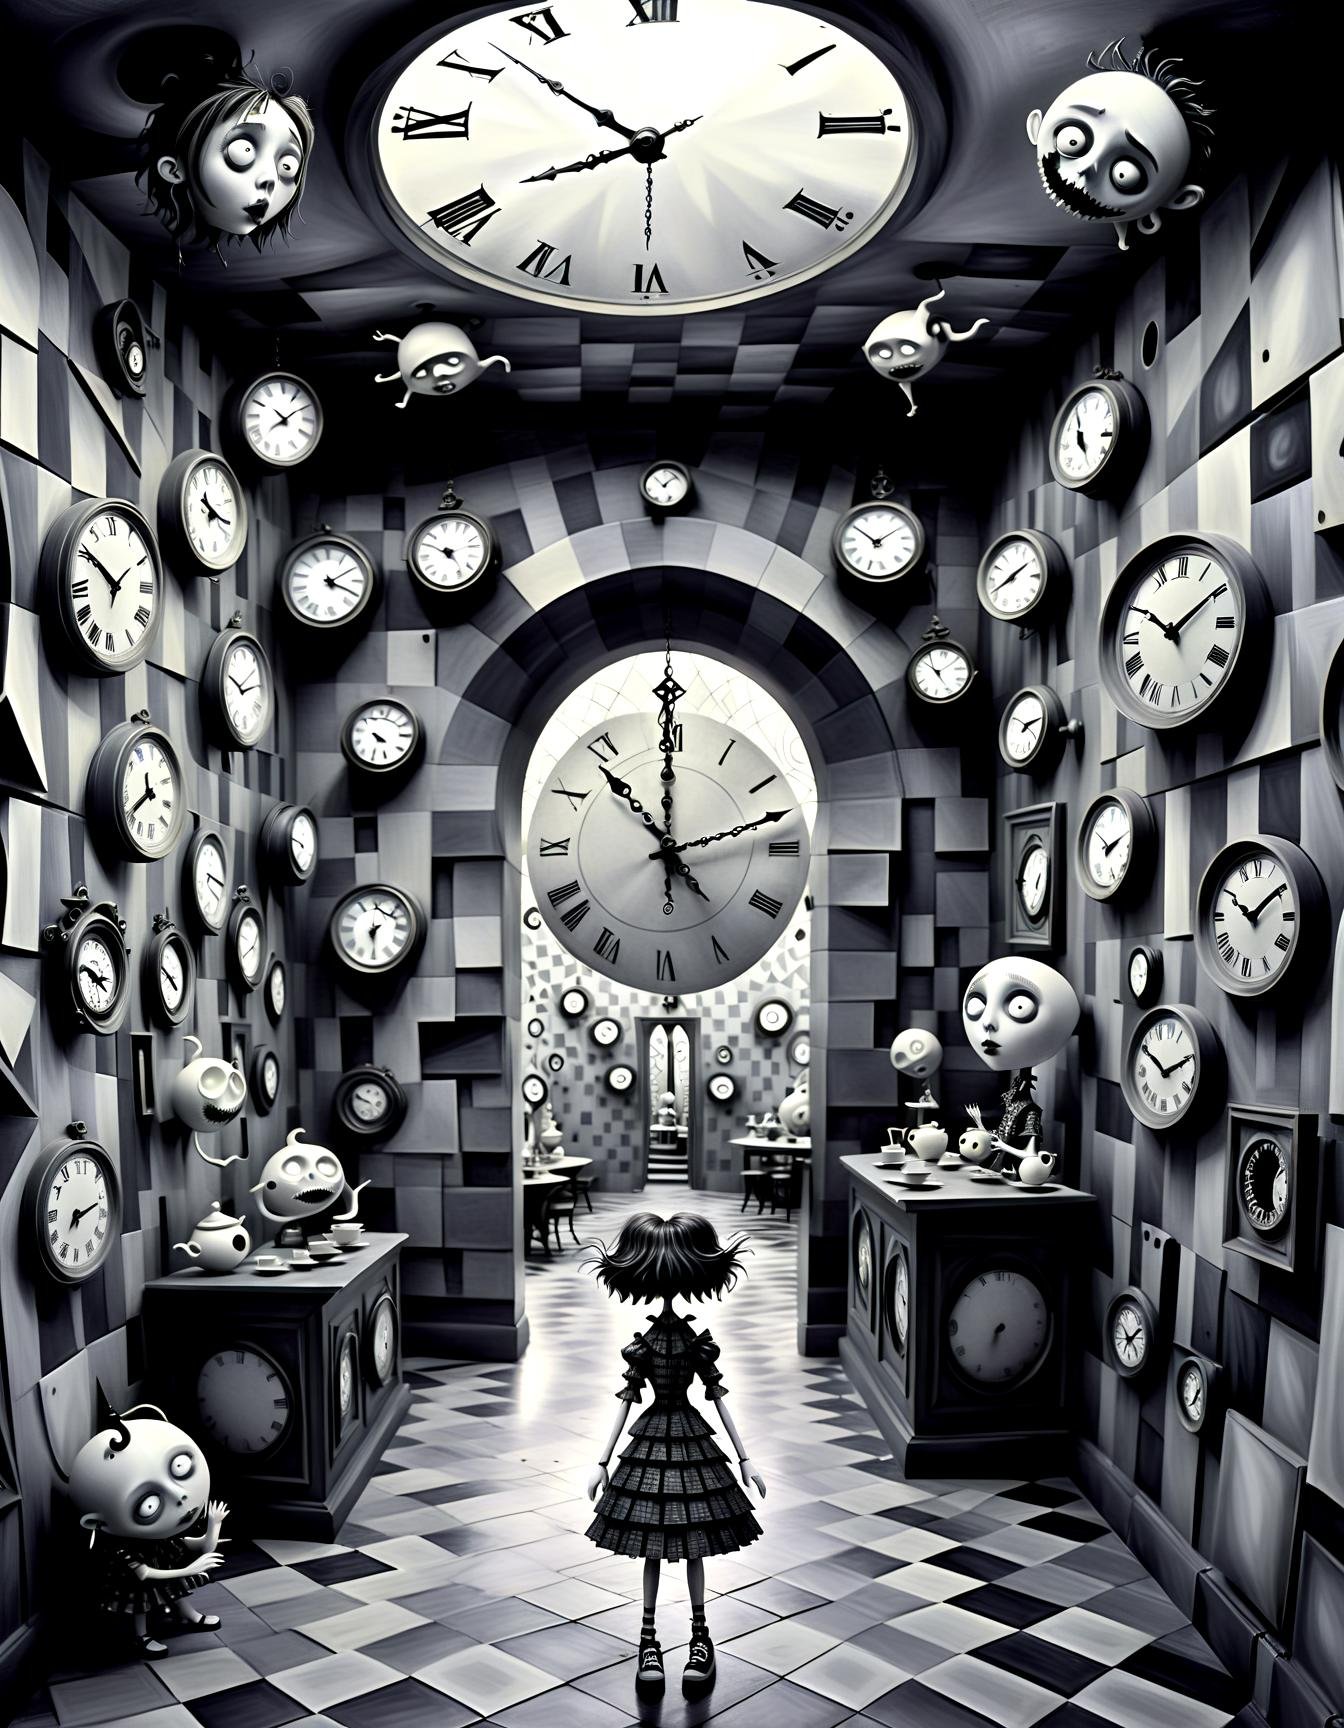 monochrome (pencil scektch:1.1),Within the labyrinthine halls of a Tim Burton-inspired mansion, clocks with faces and limbs hang on the walls, each showing a different time zone of a surreal world. Eccentric inhabitants, wearing outfits featuring dizzying geometry patterns, converse with floating teapots and levitating books. The scene unfolds like a mad tea party, blending Burton's whimsy with the mesmerizing chaos of geometric wonders.,(hand drawn with pencil:1.15), (tim burton style:1.27), ,